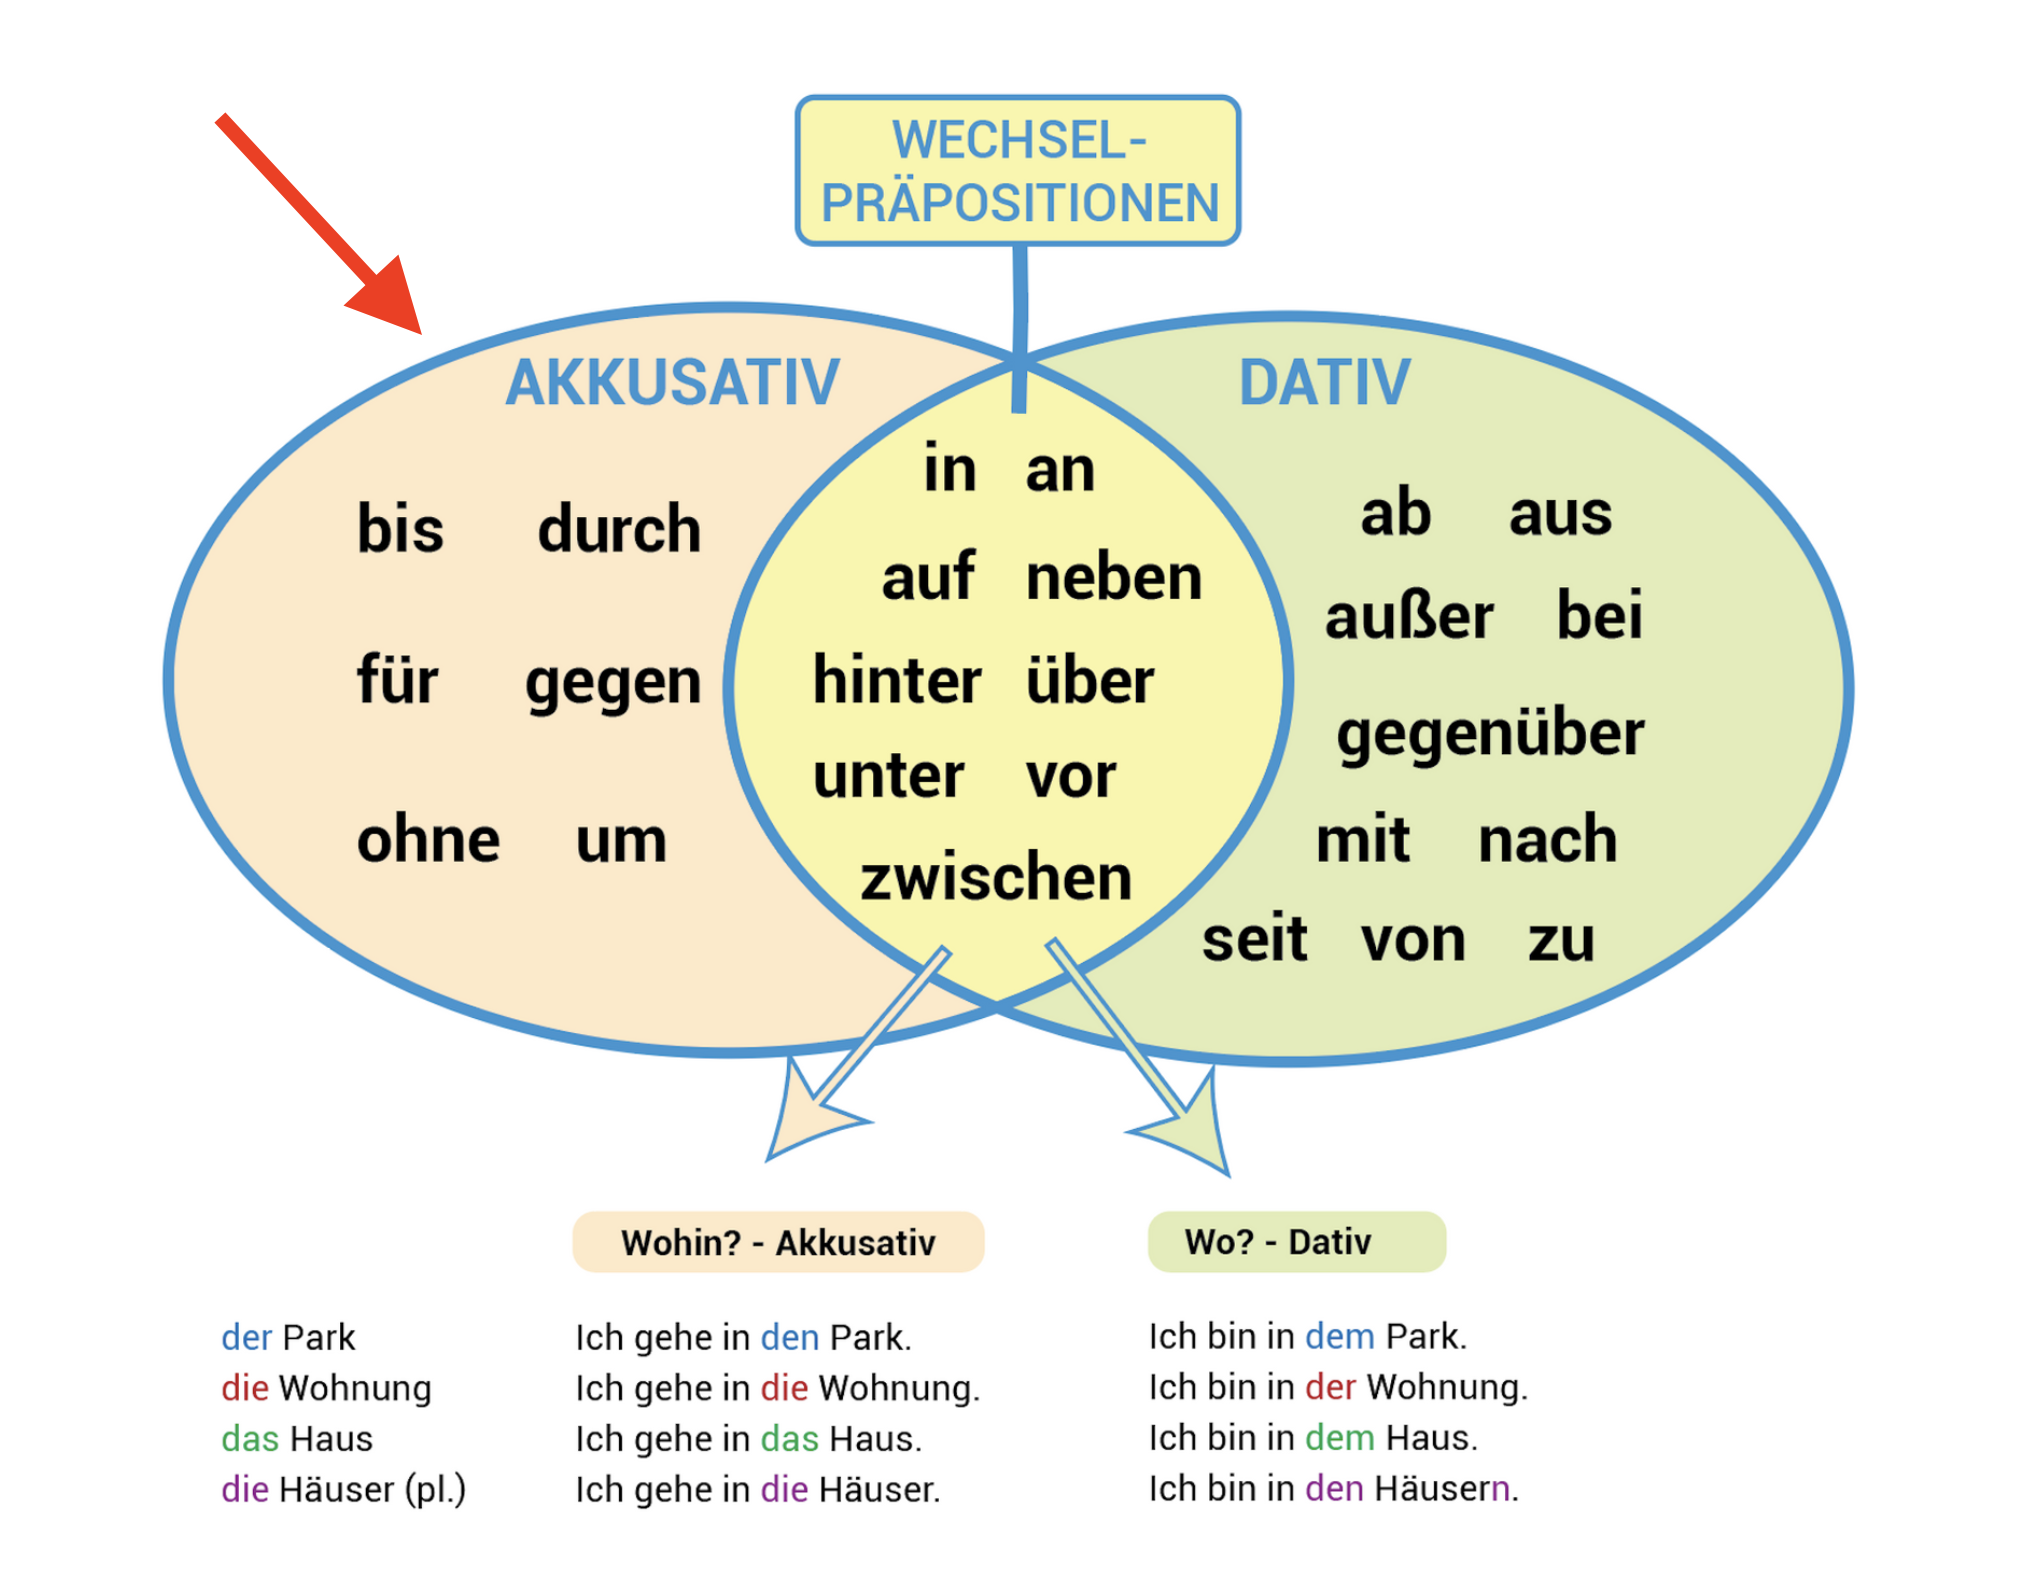 Prepositions for accusative nouns in German